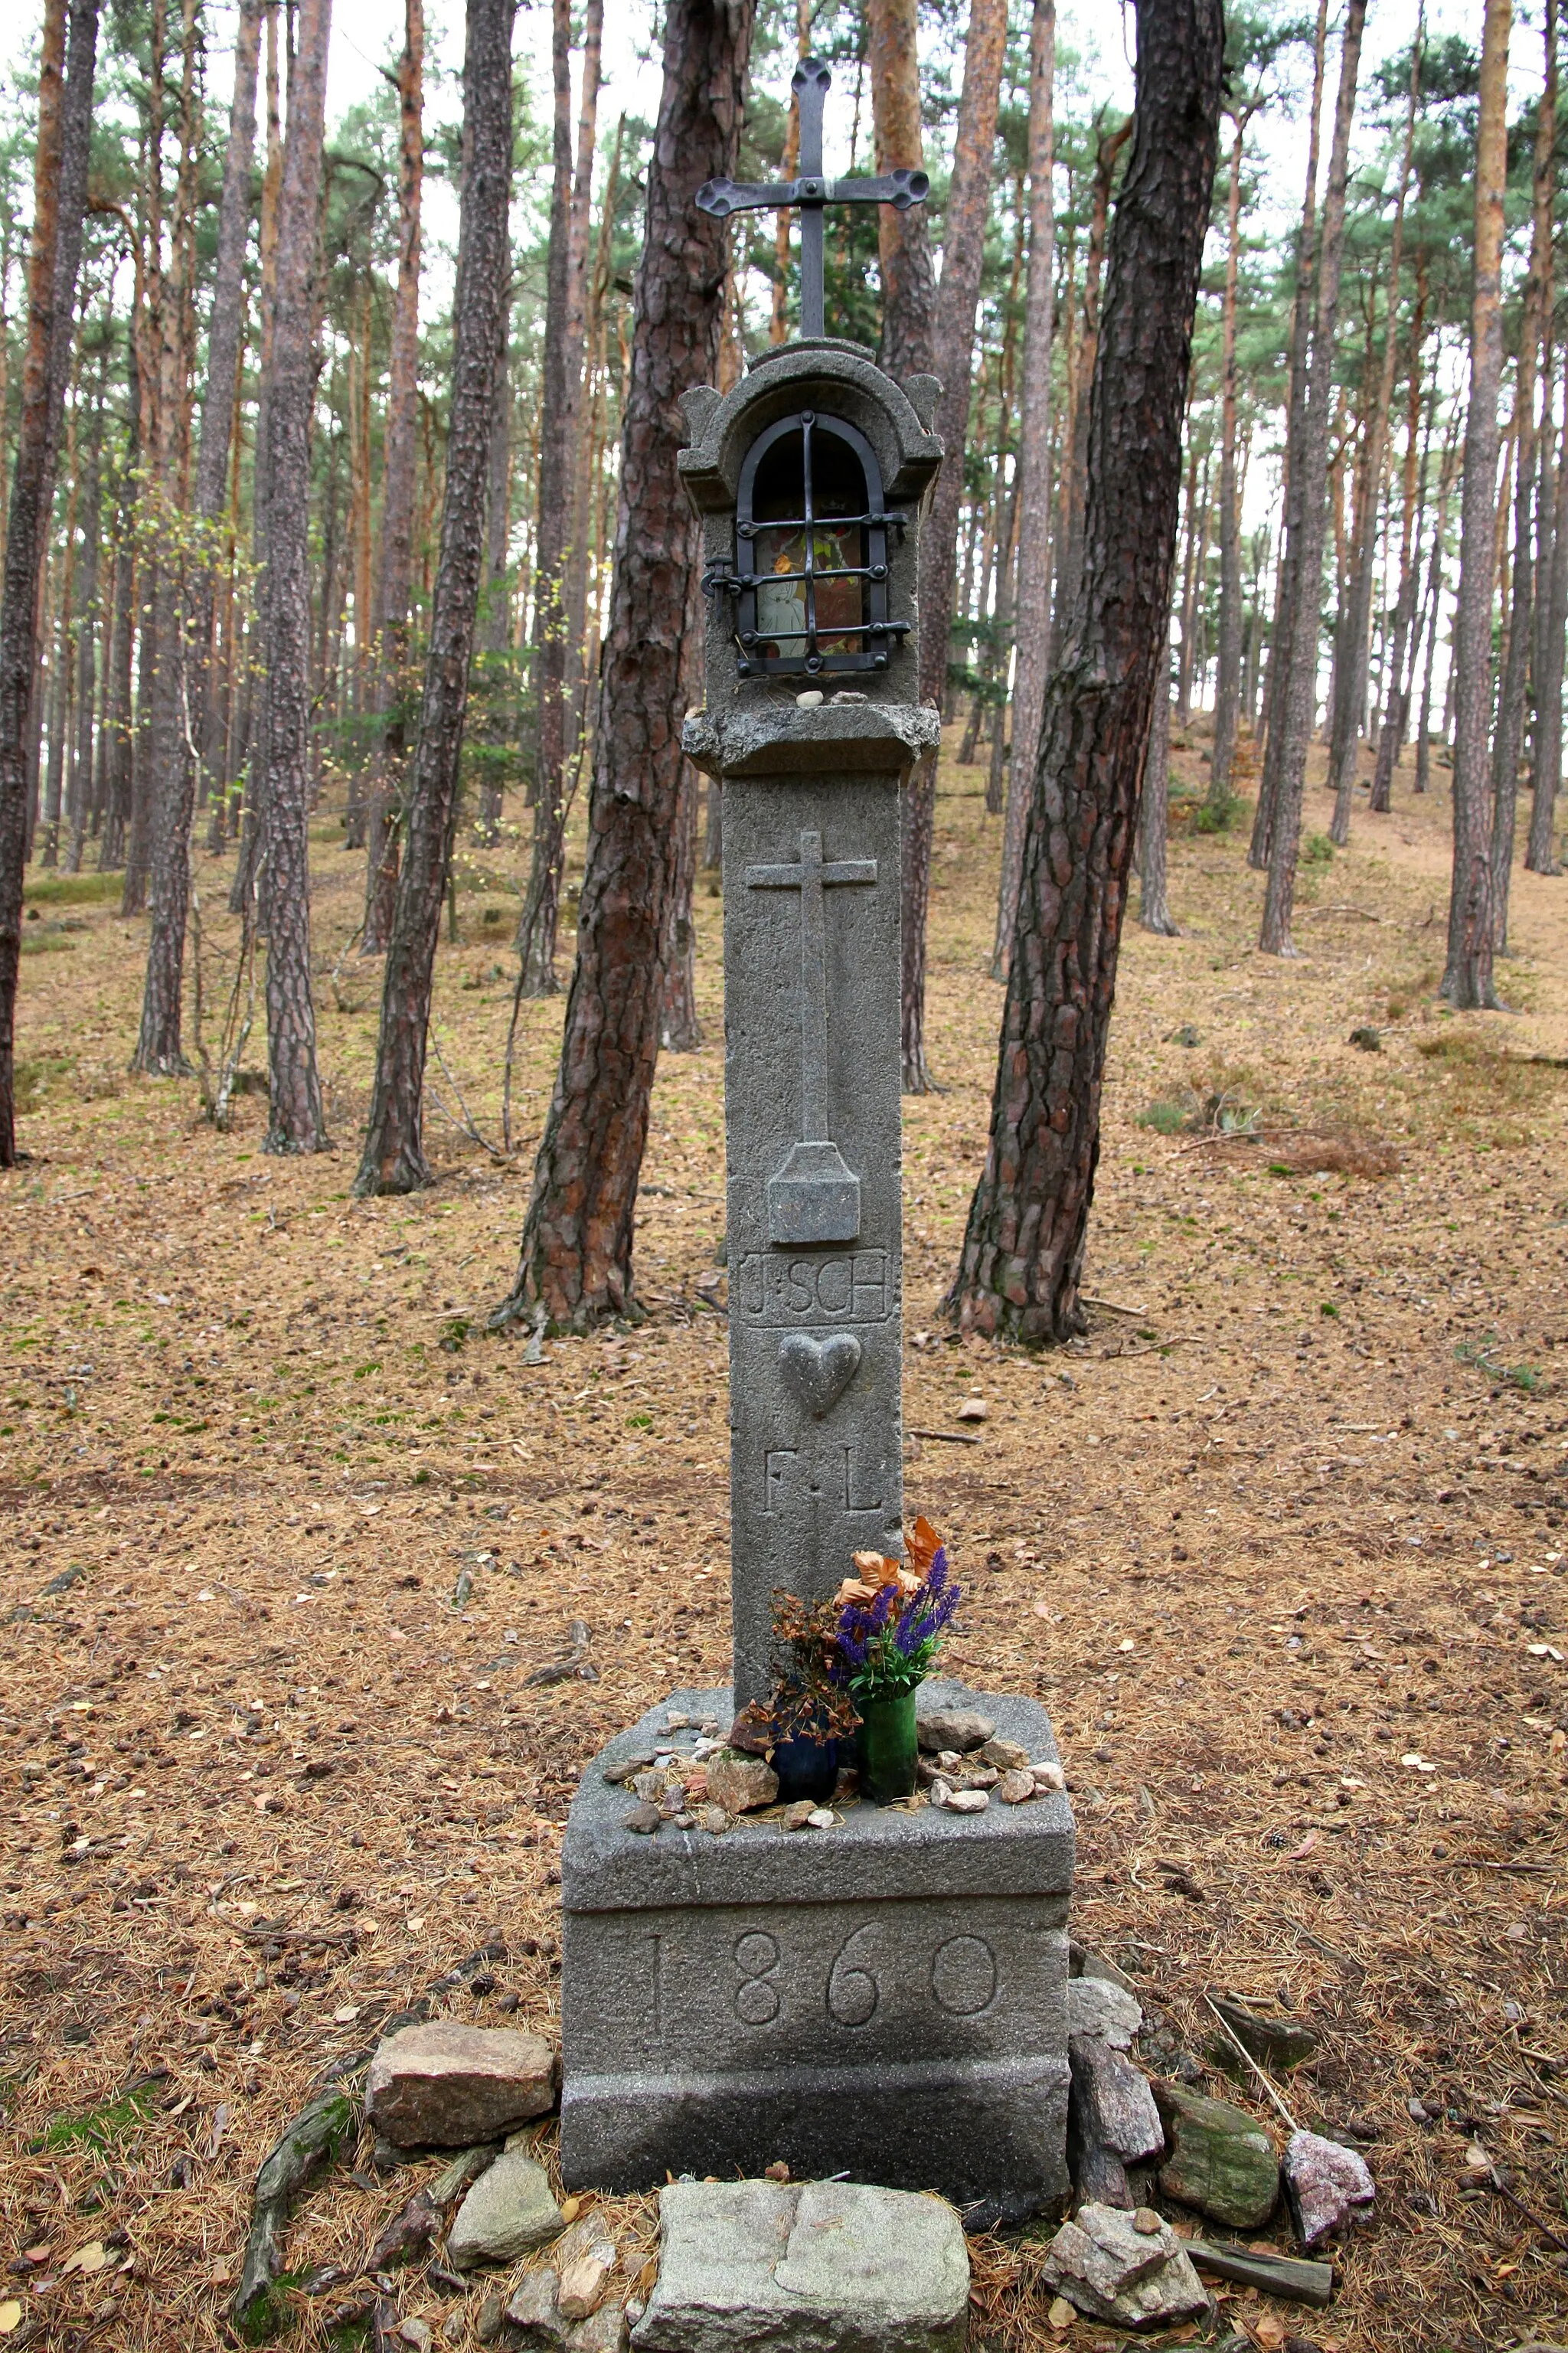 Photo showing: Stone column shrine dated 1860 at the crossroads of forest paths on the blue tourist trail from Cvrckov to Prachatice, South Bohemian Region, Czechia.